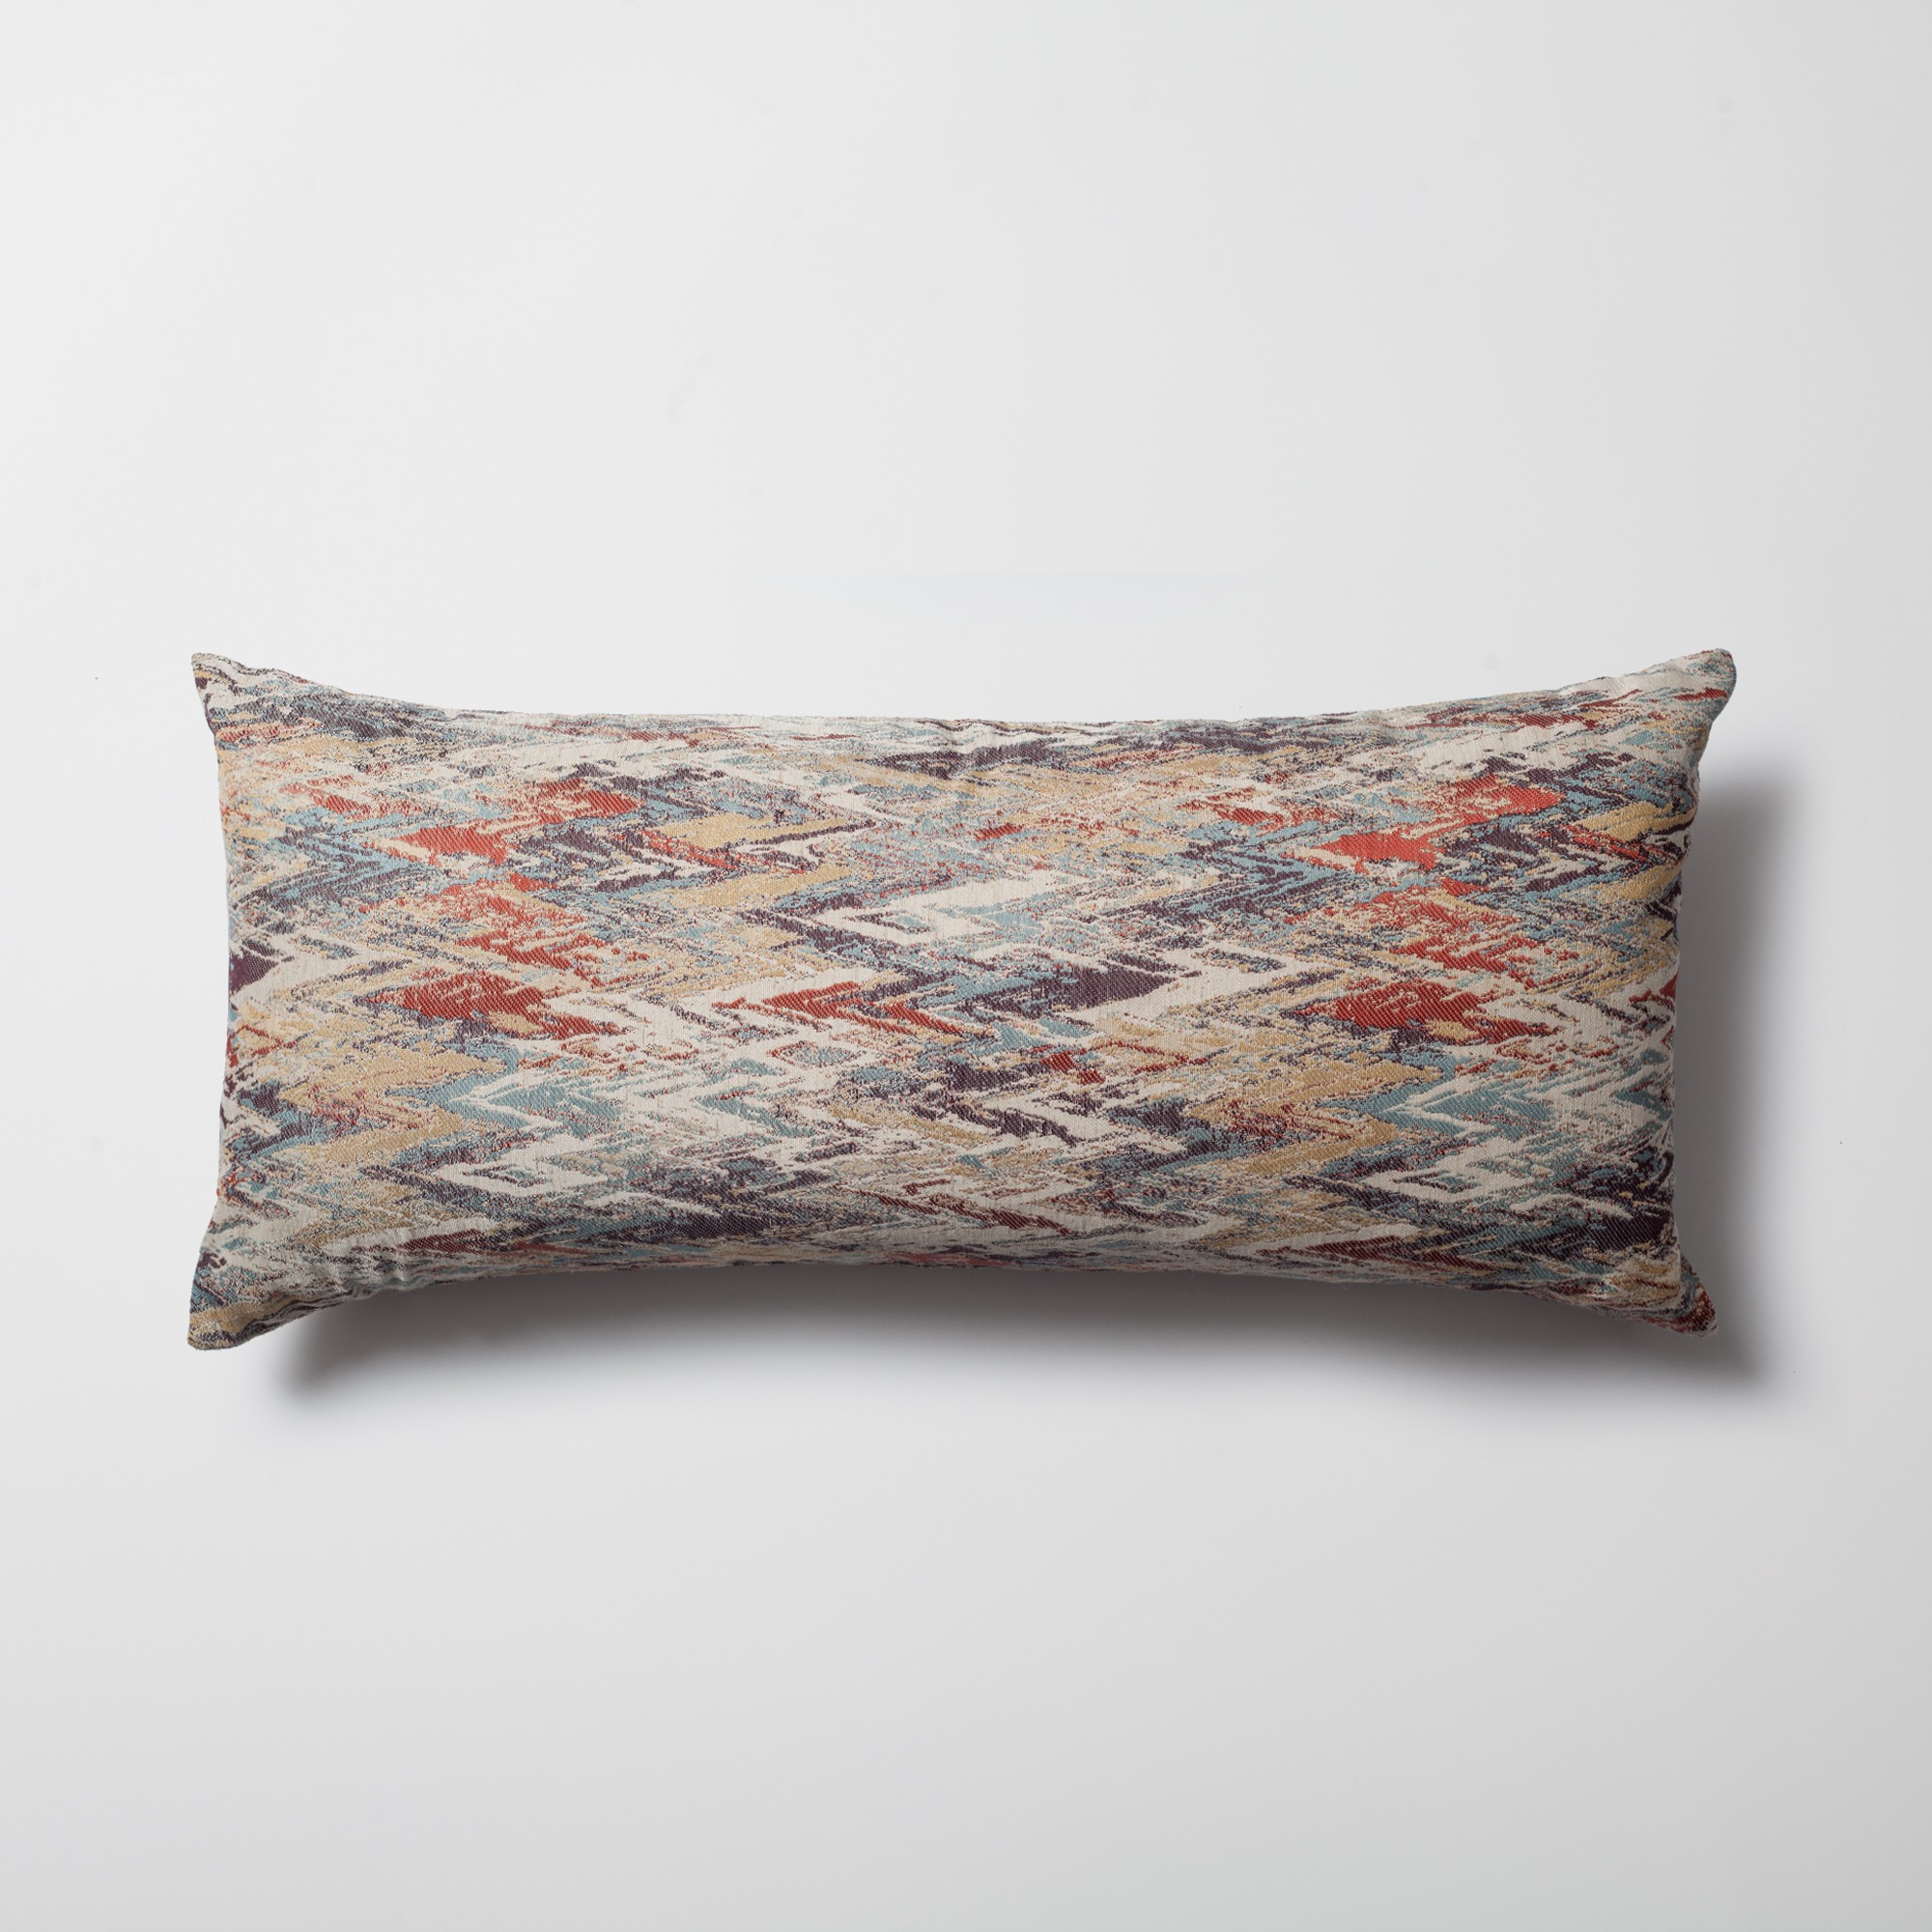 "Genoa" - Watercolor Effect Patterned Linen Pillow 14x28 Inch (Cover Only)